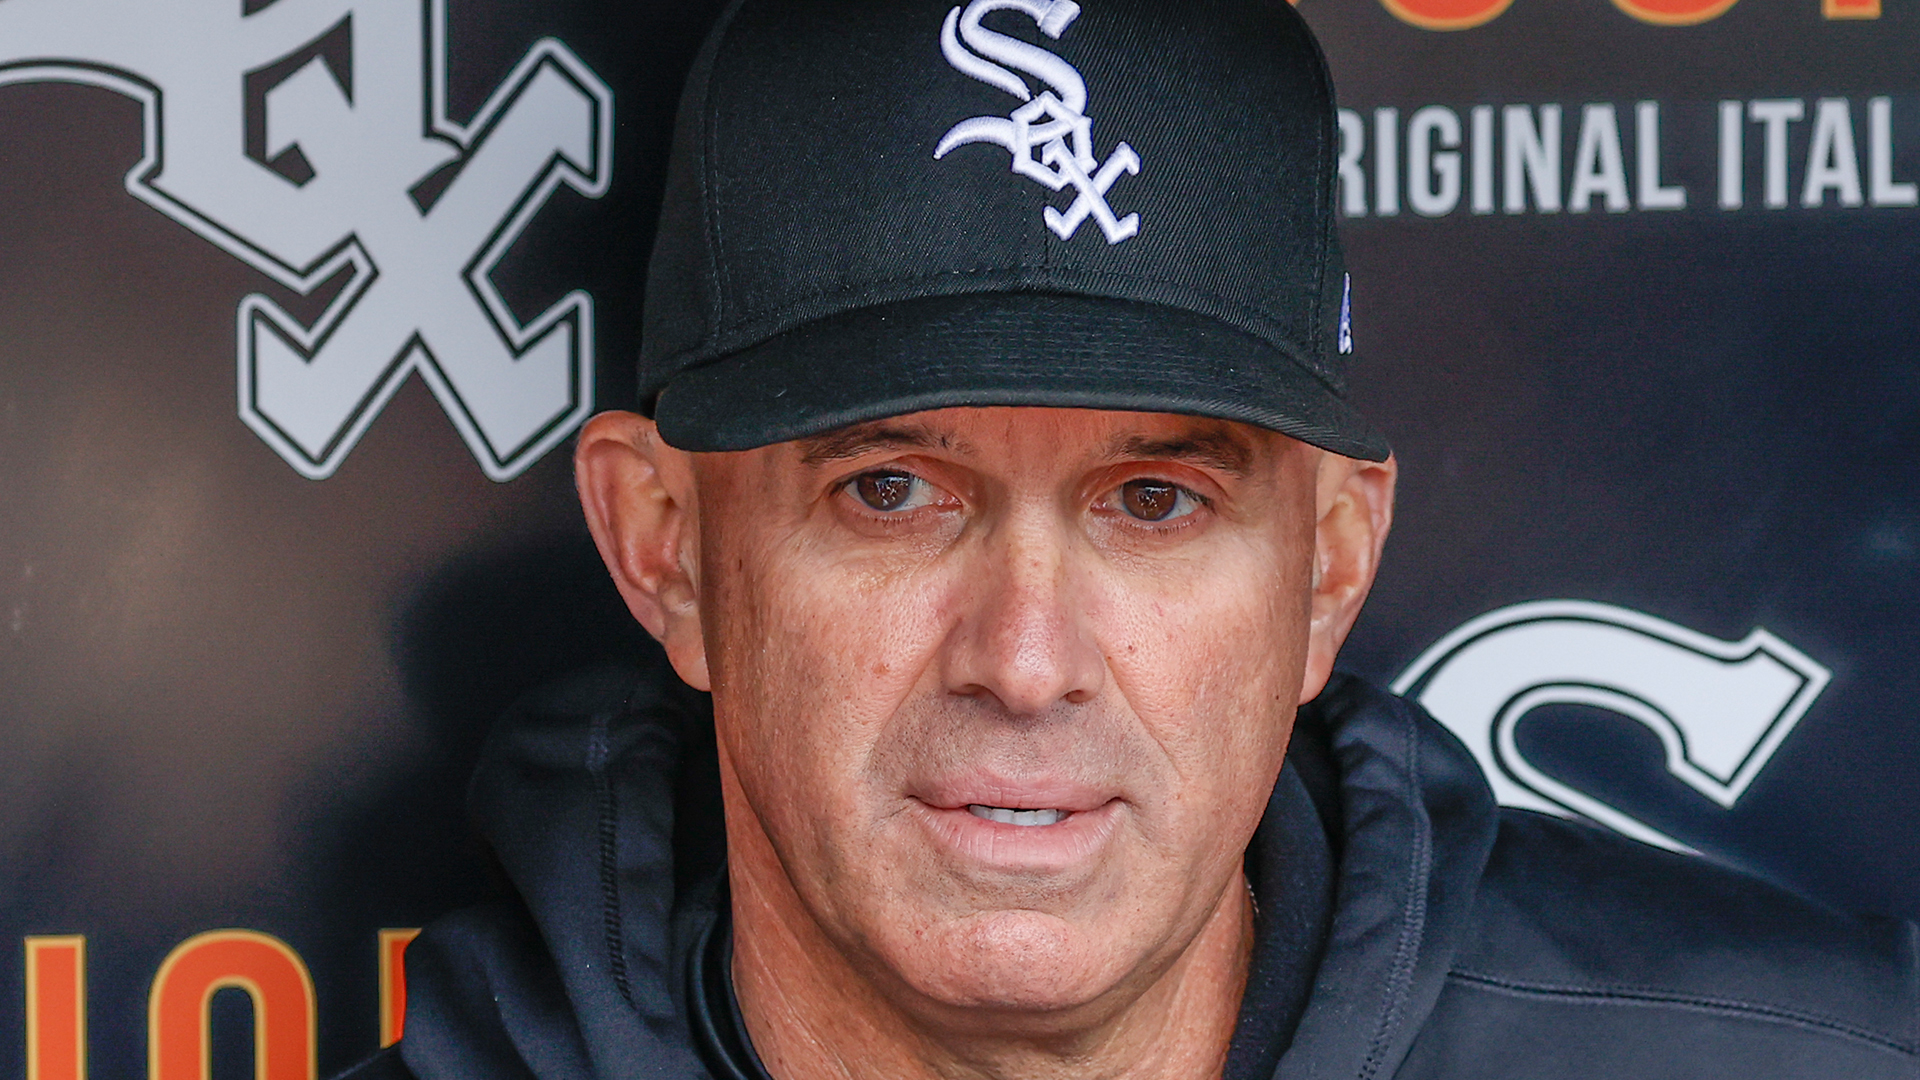 Rookie manager at the helm of first place Sox